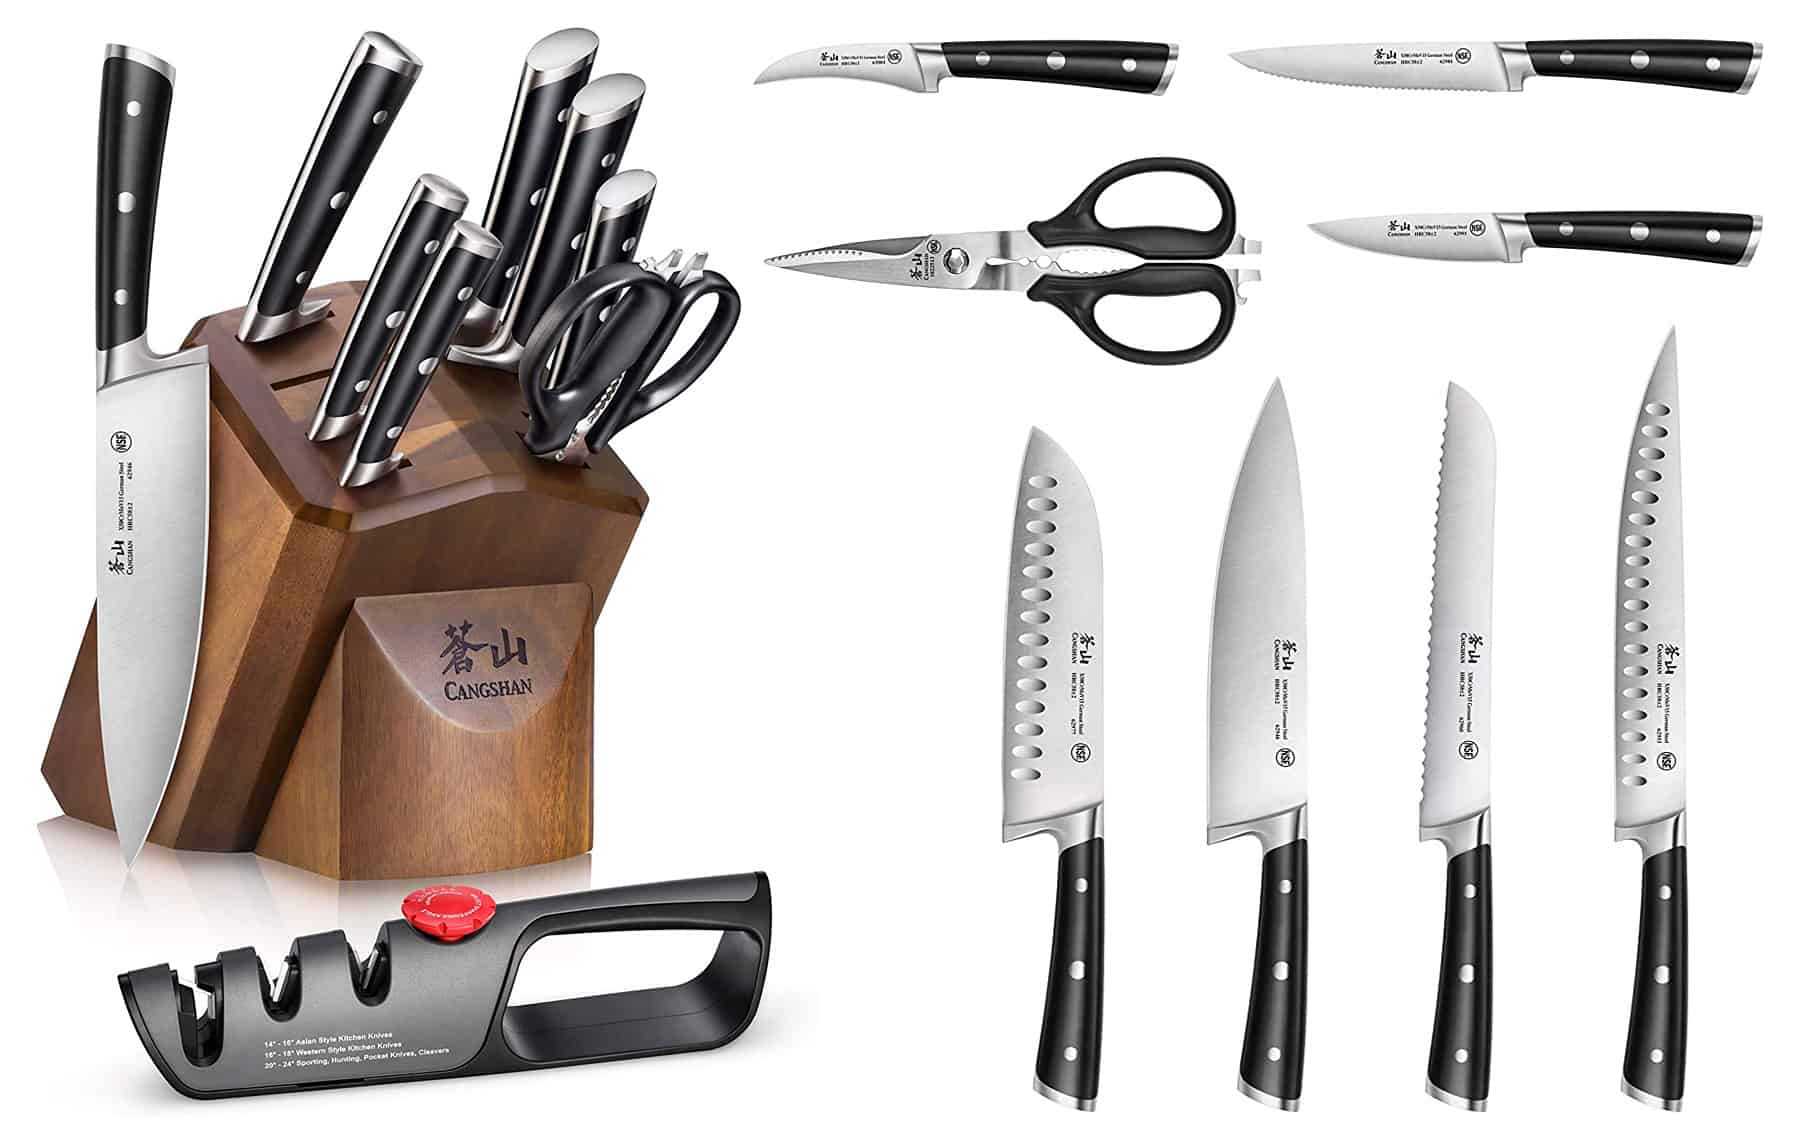 The Cangshan S1 10 piece knife sets is one of the best cutlery sets under $200. It is shown here with the knives both inside and outside the storage block. 